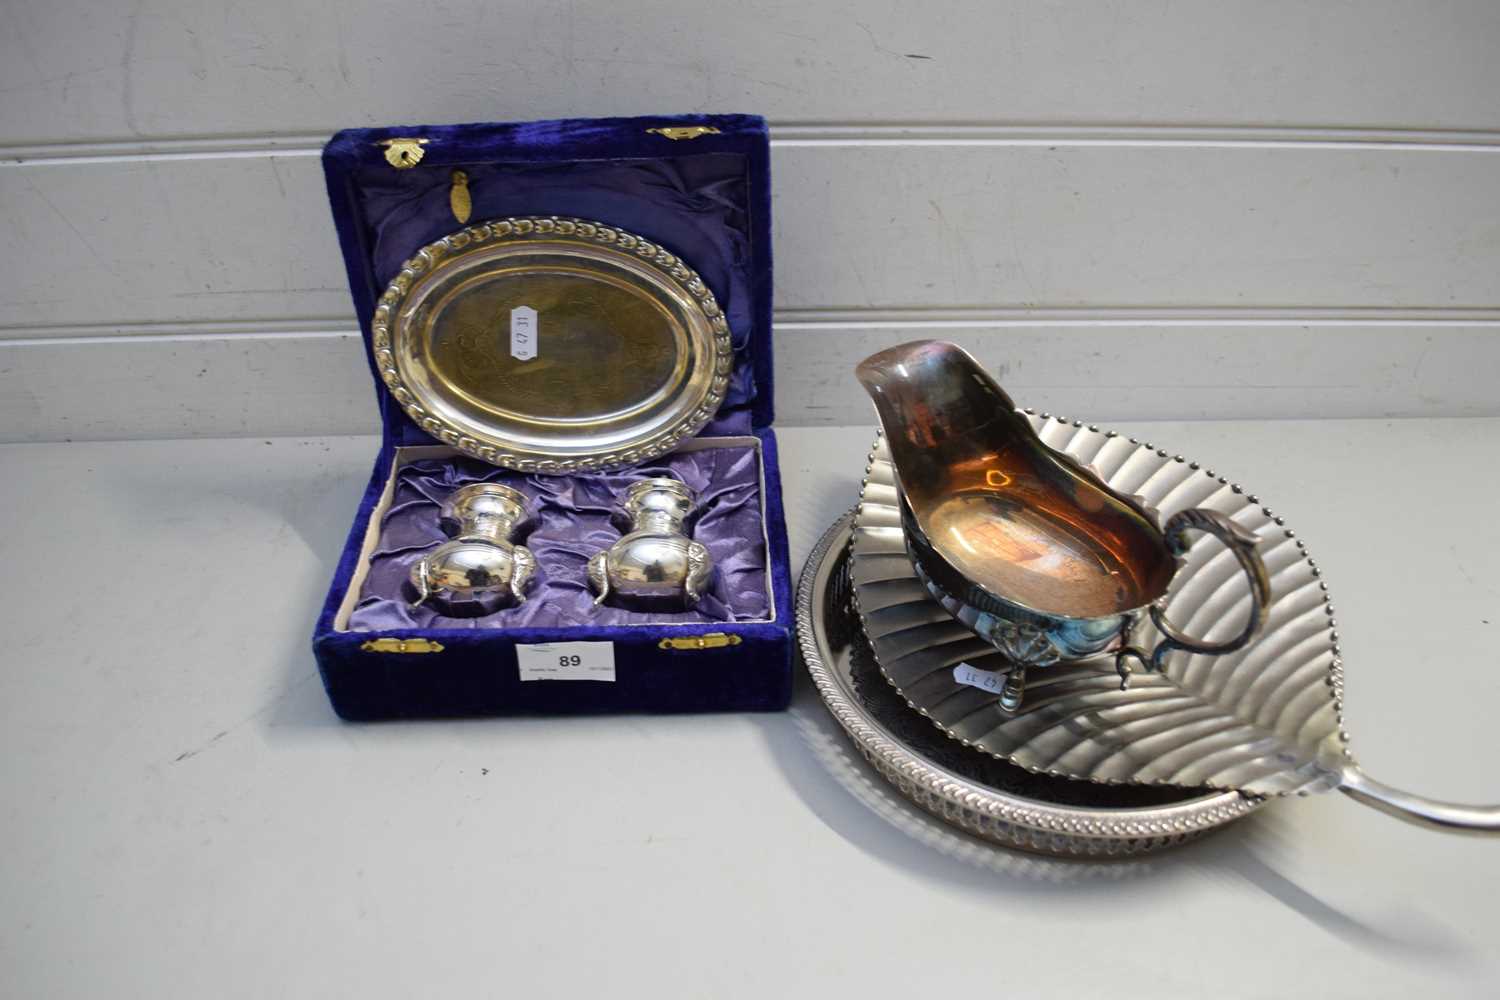 SILVER PLATED CRUET, SILVER PLATED SAUCE BOAT AND SILVER PLATED LEAF FORMED DISH AND A SERVING TRAY